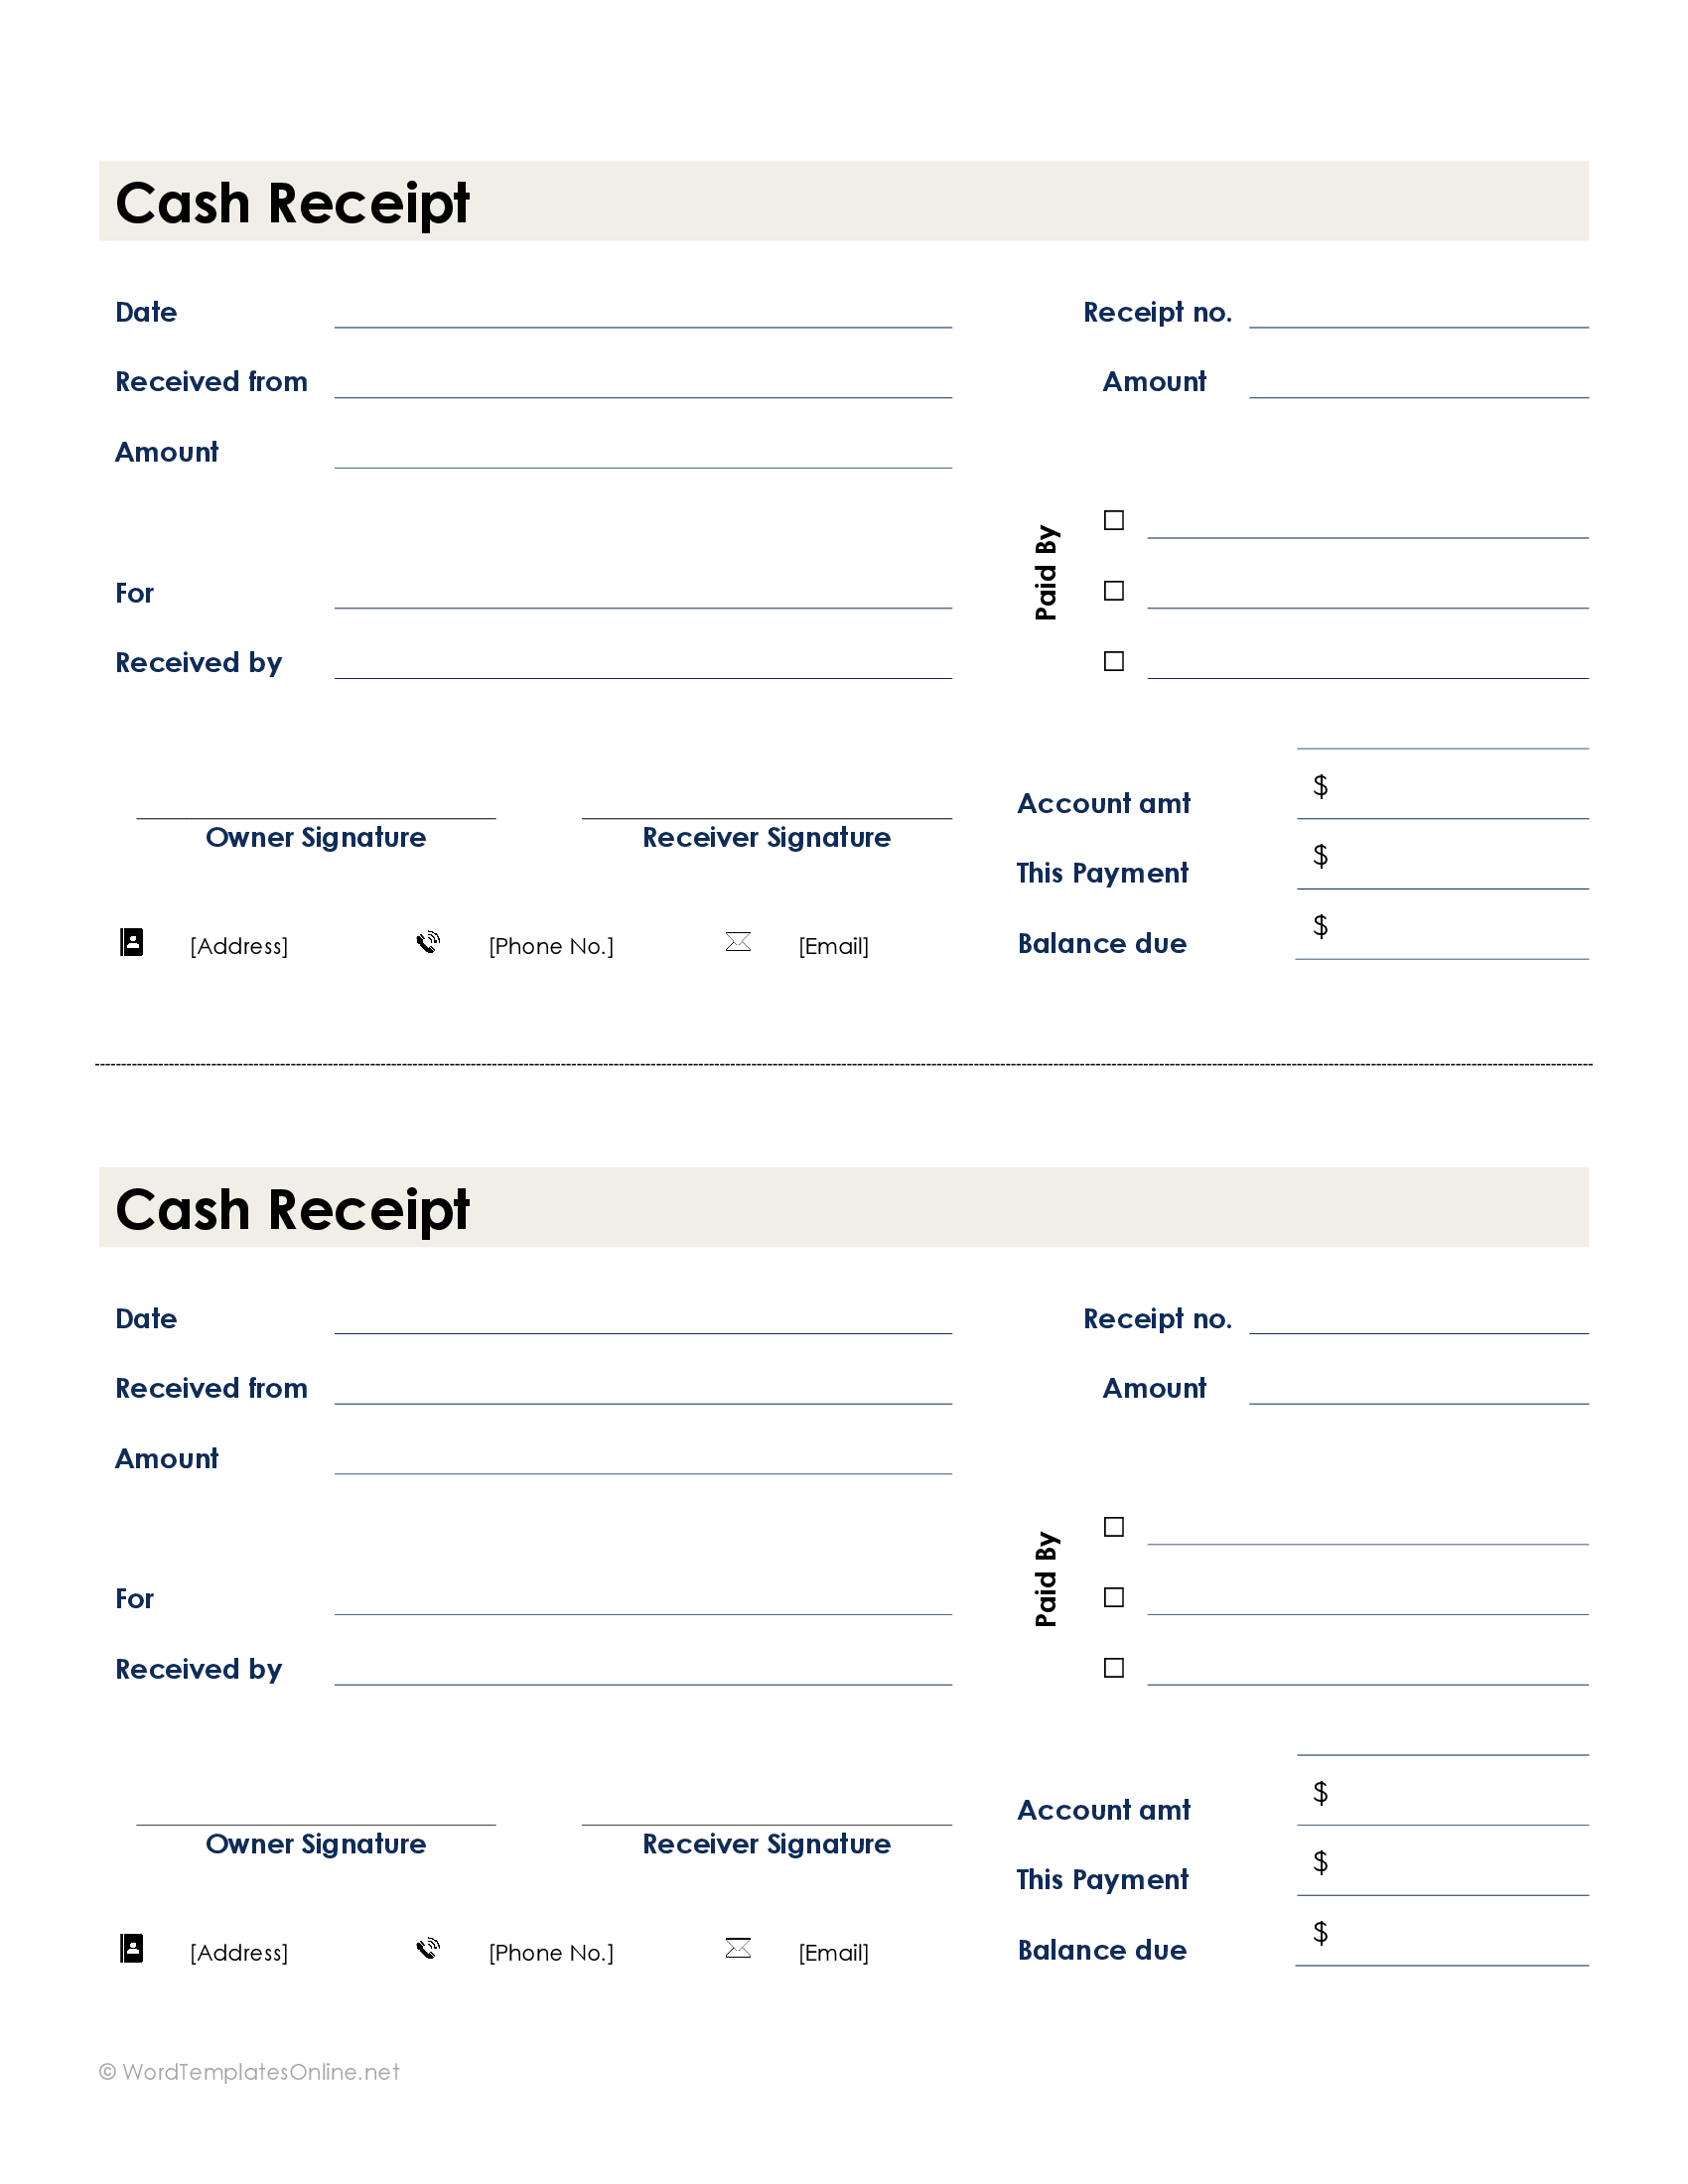 Customizable 2 in 1 Cash Receipt Template 09 for Word Document